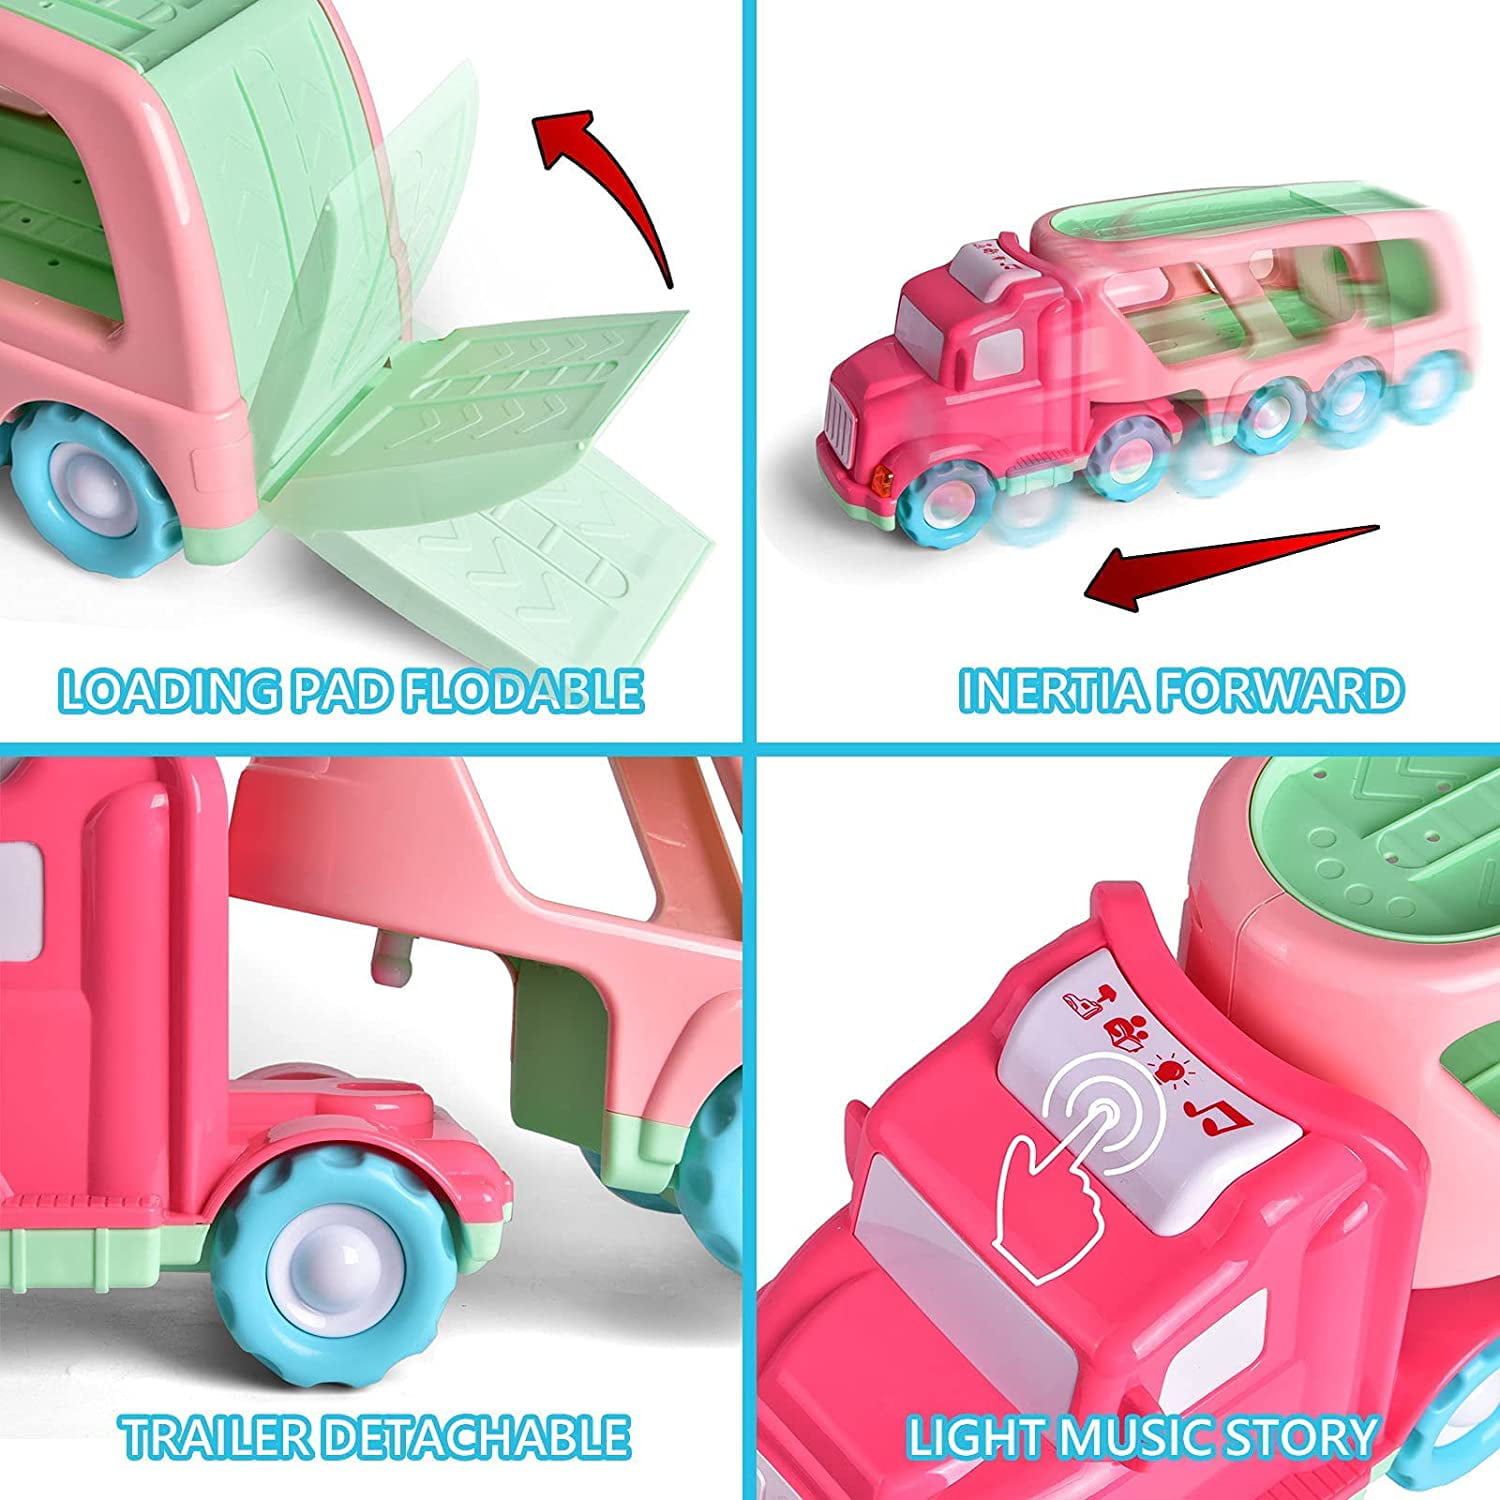 Cartoon Vehicles Toddler Girl Toys Friction Powered Pink Toy Car Carrier Transport Truck with Light & Sound 5 in 1 Toy Cars /Airplane /Helicopter Birthday Gift Toys for 1 2 Year Old Girl 